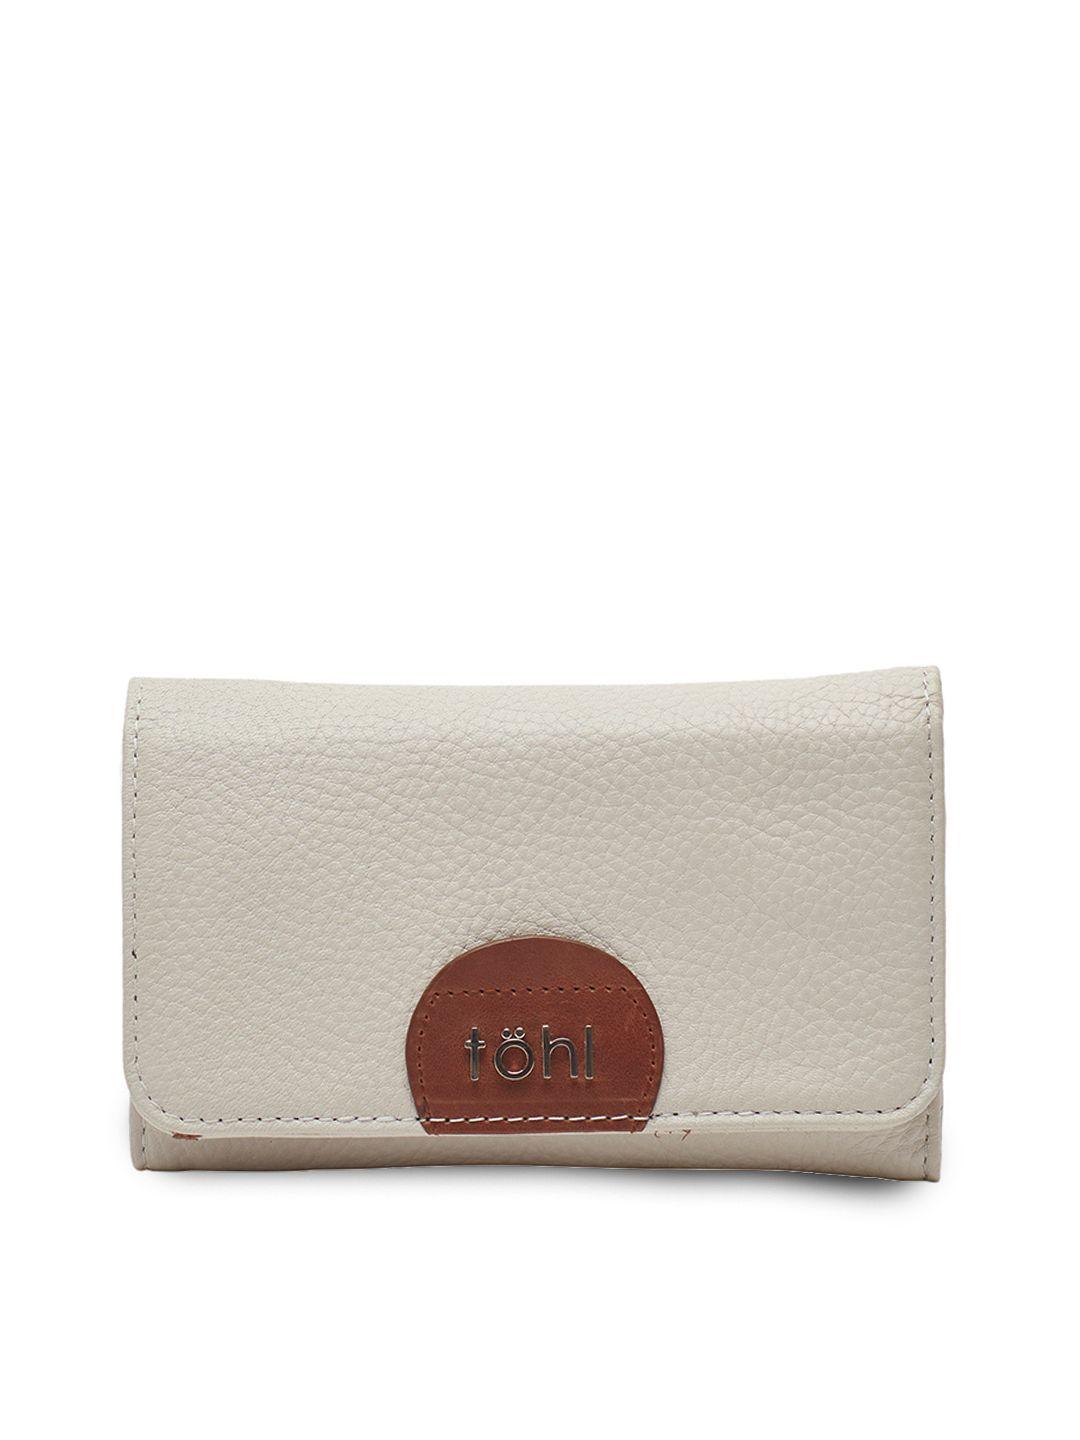 tohl women off-white & brown solid two fold wallet